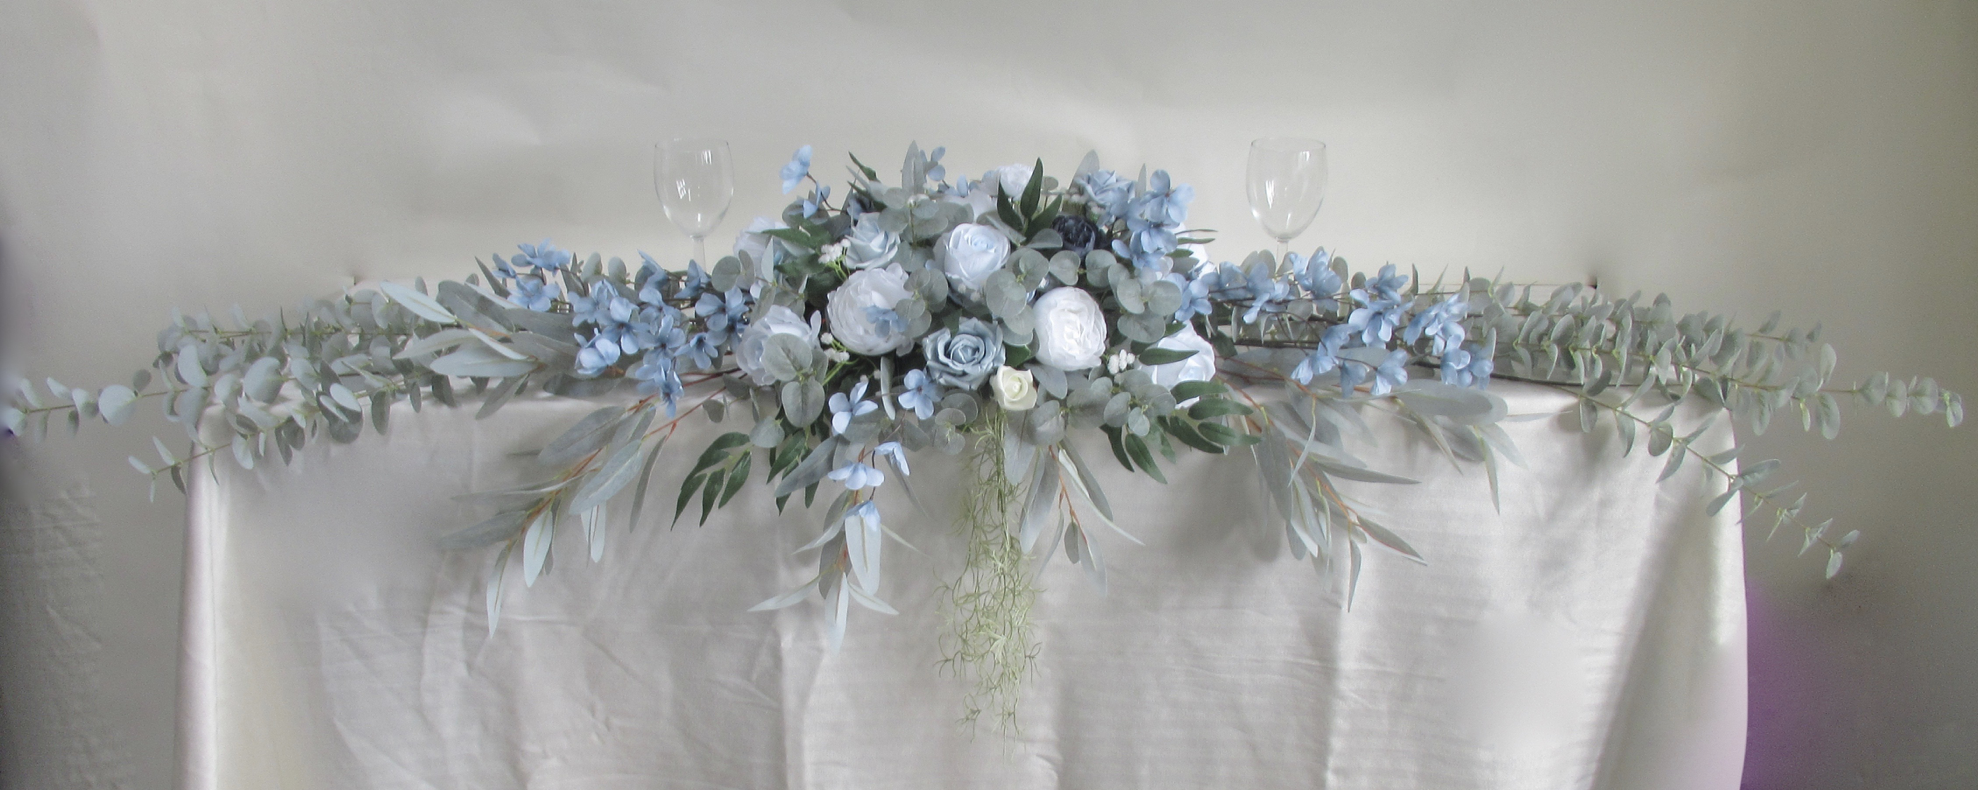 dusty blue and white wedding flowers, dusty blue and dusty navy bride and groom table centrepiece